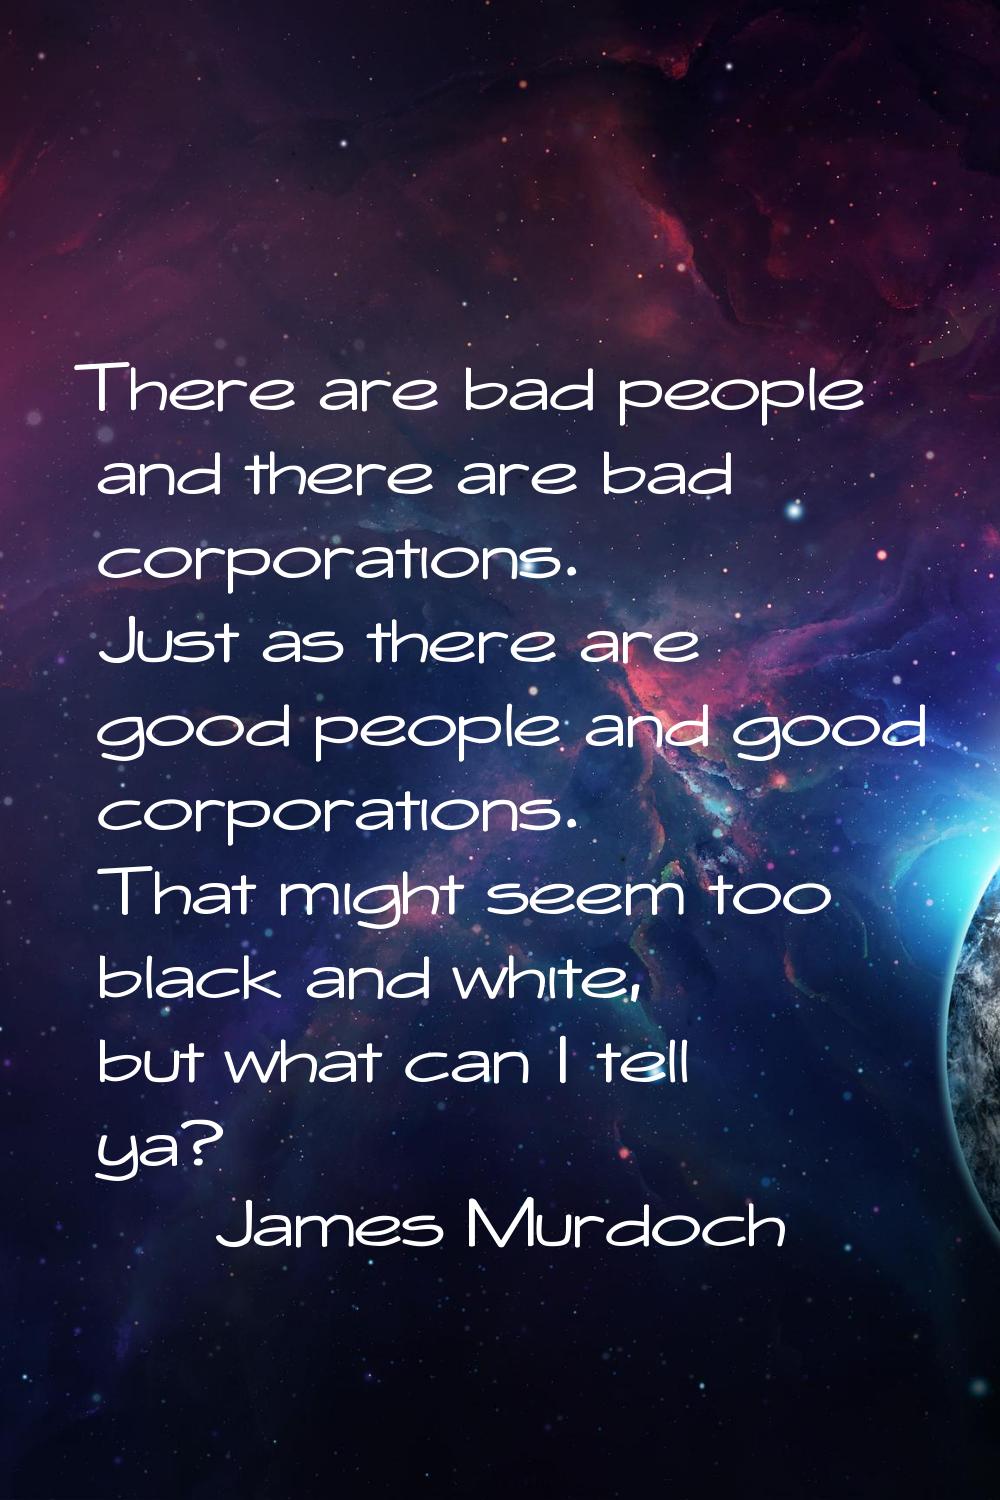 There are bad people and there are bad corporations. Just as there are good people and good corpora